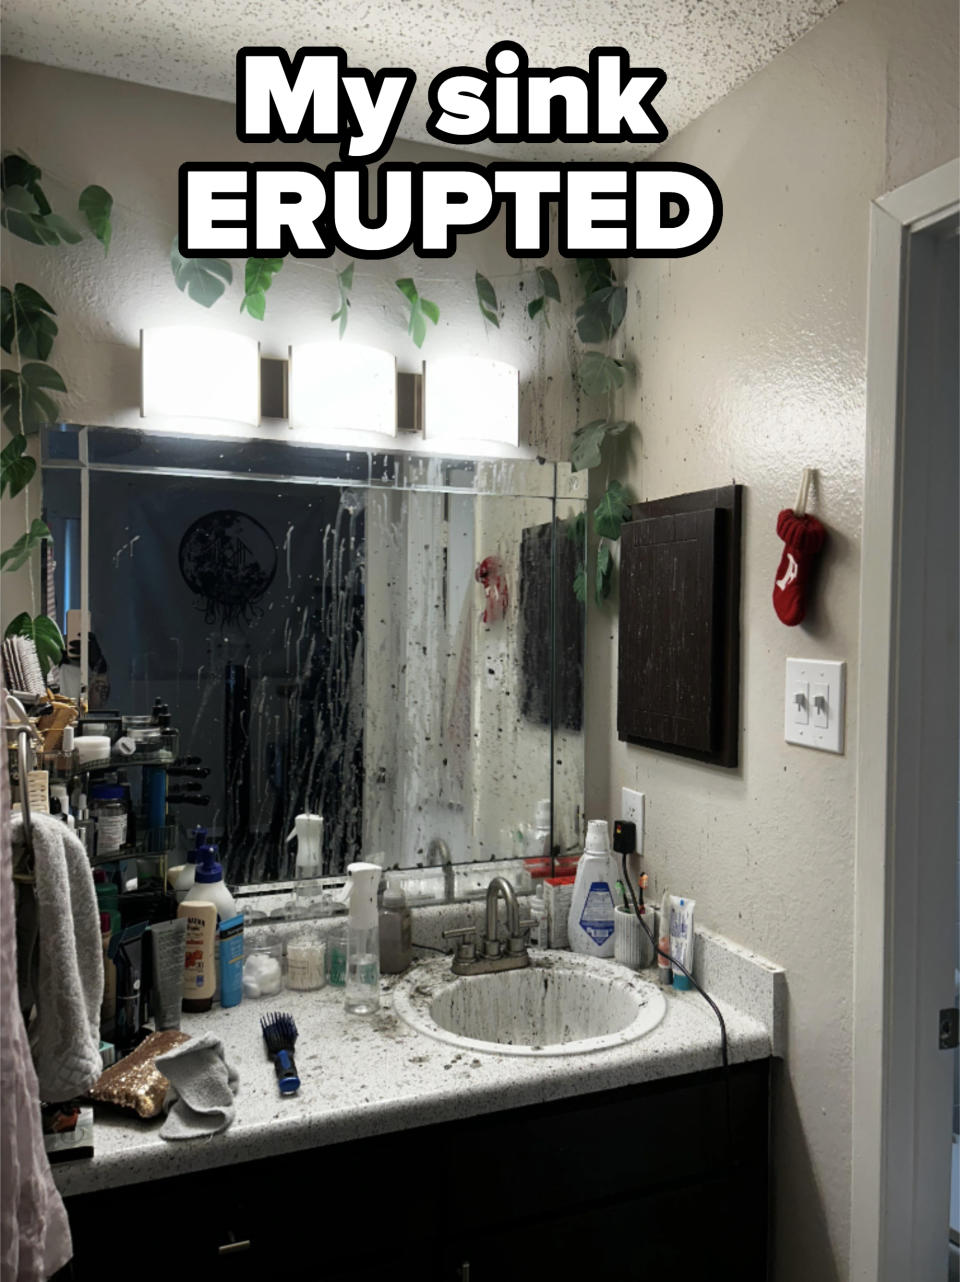 Bathroom vanity with unorganized items on the counter, mirror speckled with spots, and hanging plants above. Walls display framed art and a small red stocking